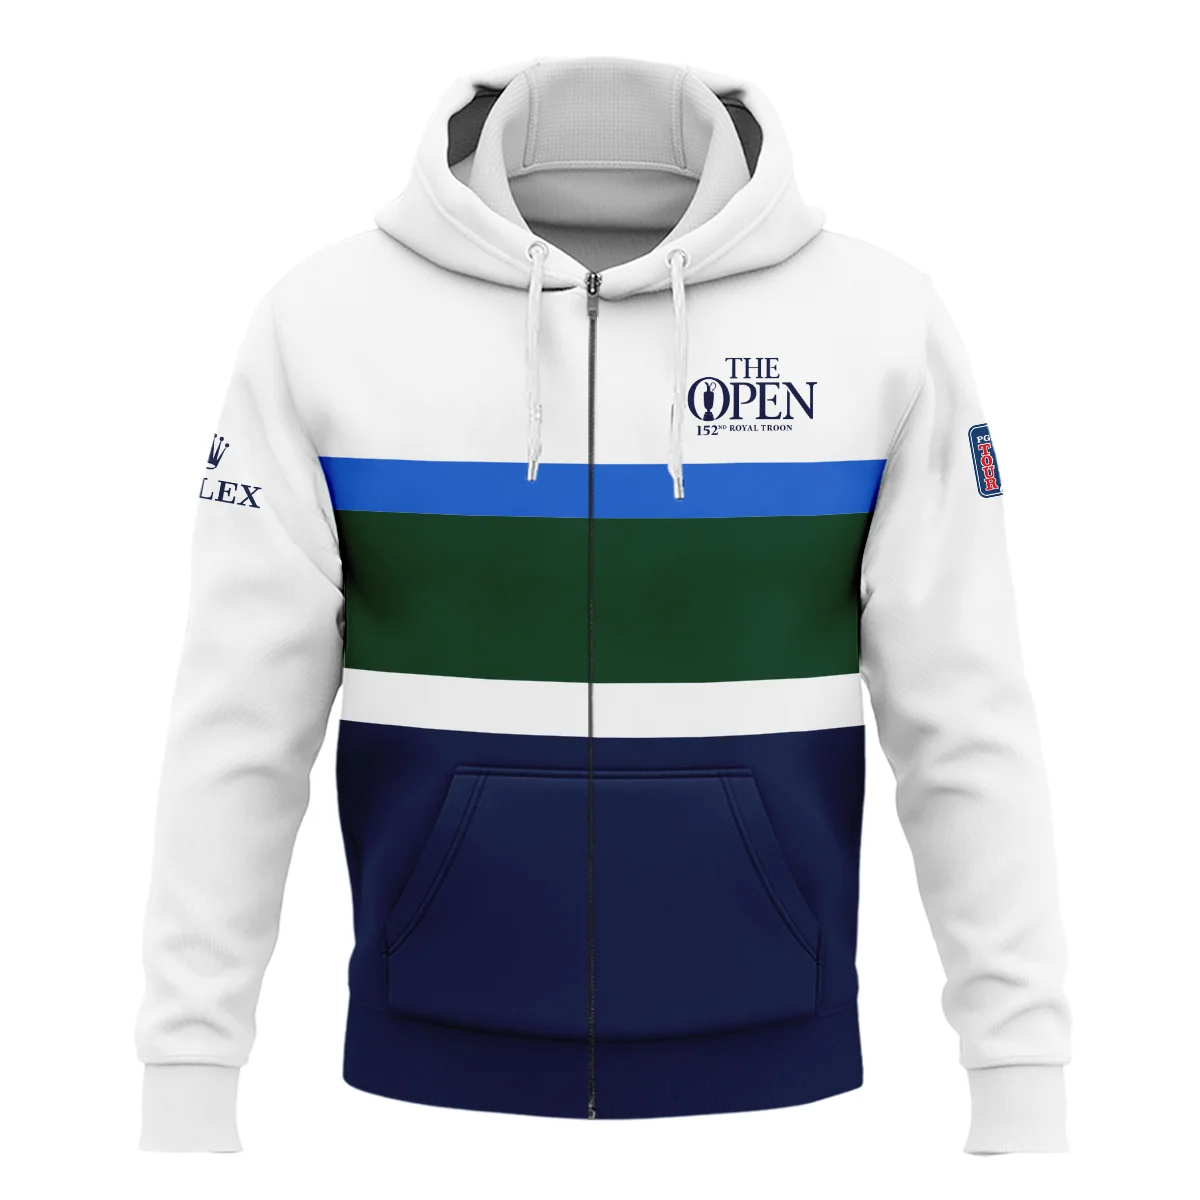 White Blue Green Background Rolex 152nd Open Championship Sleeveless Jacket All Over Prints HOTOP270624A01ROXSJK